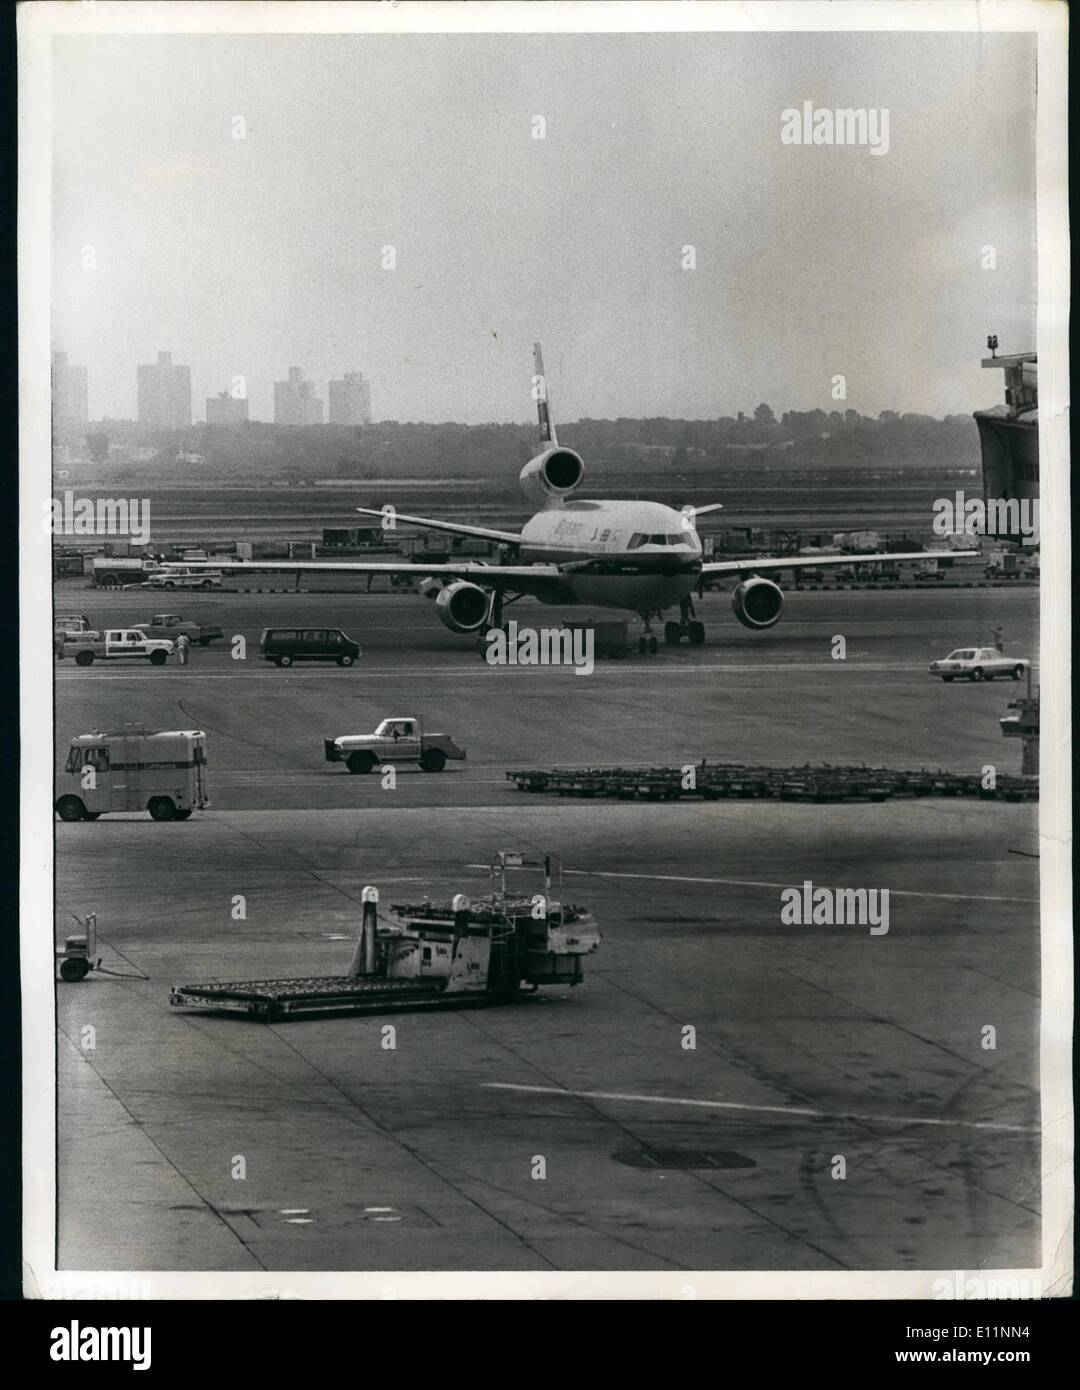 Jul. 07, 1979 - The First Scheduled DC-10 To Land At Kennedy Airport ...